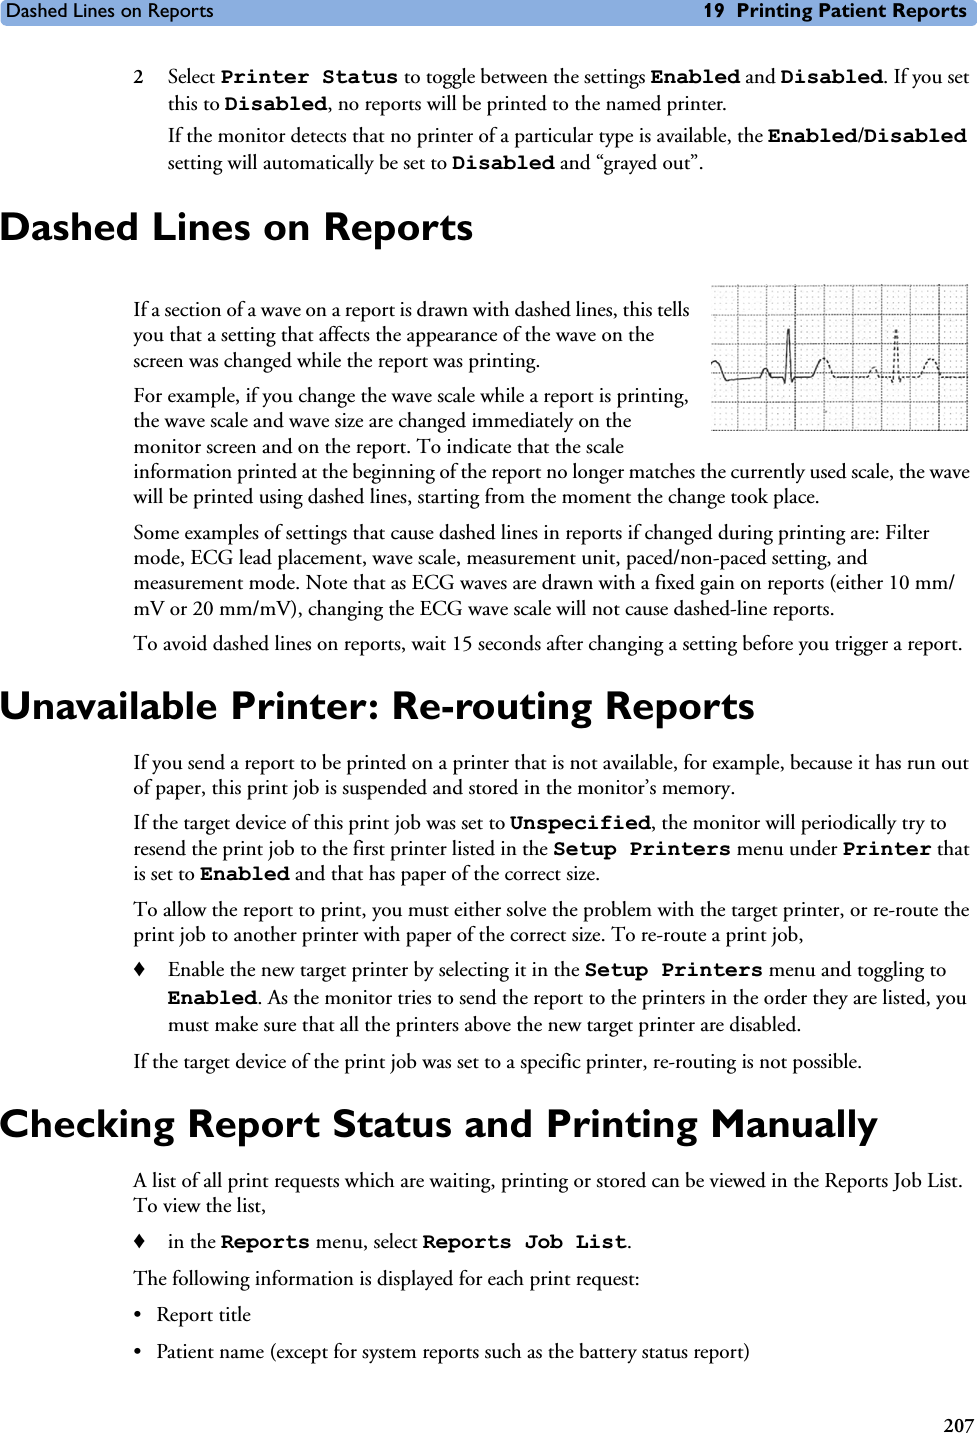 Dashed Lines on Reports 19 Printing Patient Reports2072Select Printer Status to toggle between the settings Enabled and Disabled. If you set this to Disabled, no reports will be printed to the named printer. If the monitor detects that no printer of a particular type is available, the Enabled/Disabled setting will automatically be set to Disabled and “grayed out”.Dashed Lines on ReportsIf a section of a wave on a report is drawn with dashed lines, this tells you that a setting that affects the appearance of the wave on the screen was changed while the report was printing. For example, if you change the wave scale while a report is printing, the wave scale and wave size are changed immediately on the monitor screen and on the report. To indicate that the scale information printed at the beginning of the report no longer matches the currently used scale, the wave will be printed using dashed lines, starting from the moment the change took place. Some examples of settings that cause dashed lines in reports if changed during printing are: Filter mode, ECG lead placement, wave scale, measurement unit, paced/non-paced setting, and measurement mode. Note that as ECG waves are drawn with a fixed gain on reports (either 10 mm/mV or 20 mm/mV), changing the ECG wave scale will not cause dashed-line reports. To avoid dashed lines on reports, wait 15 seconds after changing a setting before you trigger a report.Unavailable Printer: Re-routing ReportsIf you send a report to be printed on a printer that is not available, for example, because it has run out of paper, this print job is suspended and stored in the monitor’s memory.If the target device of this print job was set to Unspecified, the monitor will periodically try to resend the print job to the first printer listed in the Setup Printers menu under Printer that is set to Enabled and that has paper of the correct size. To allow the report to print, you must either solve the problem with the target printer, or re-route the print job to another printer with paper of the correct size. To re-route a print job,♦Enable the new target printer by selecting it in the Setup Printers menu and toggling to Enabled. As the monitor tries to send the report to the printers in the order they are listed, you must make sure that all the printers above the new target printer are disabled.If the target device of the print job was set to a specific printer, re-routing is not possible. Checking Report Status and Printing ManuallyA list of all print requests which are waiting, printing or stored can be viewed in the Reports Job List. To view the list, ♦in the Reports menu, select Reports Job List.The following information is displayed for each print request:• Report title• Patient name (except for system reports such as the battery status report)